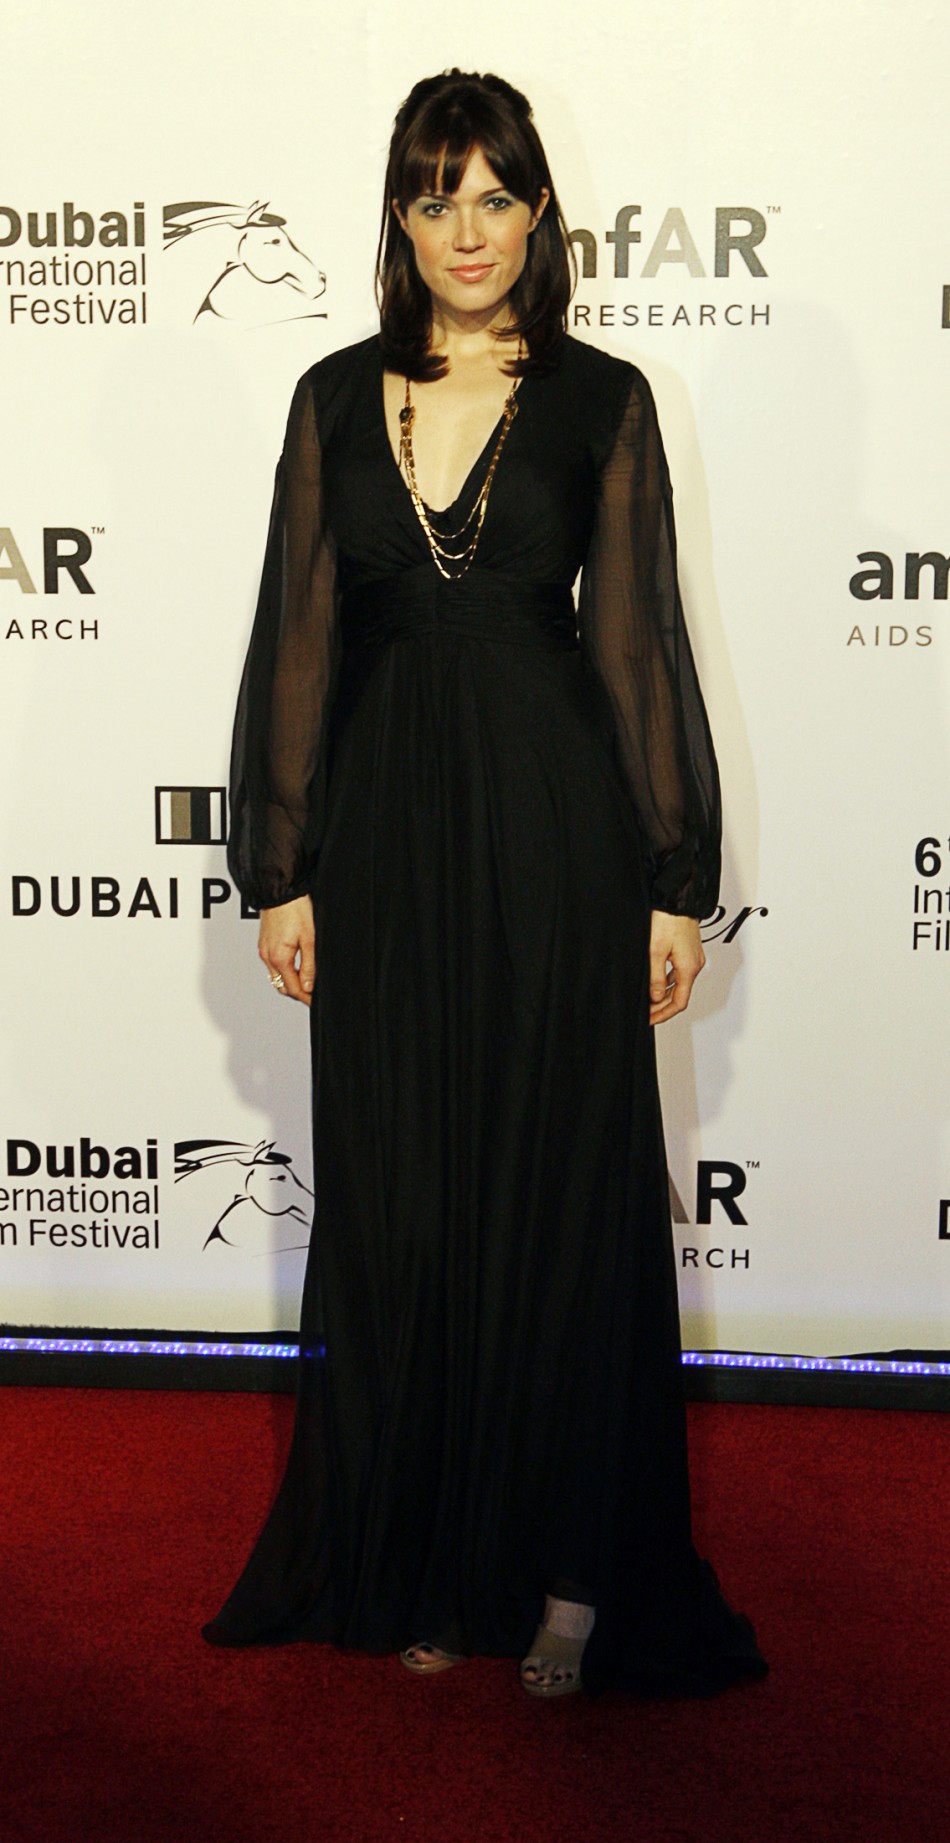 U.S. actress Mandy Moore arrive for the Auction for Cinema Against Aids during the Dubai International Film festival in Dubai